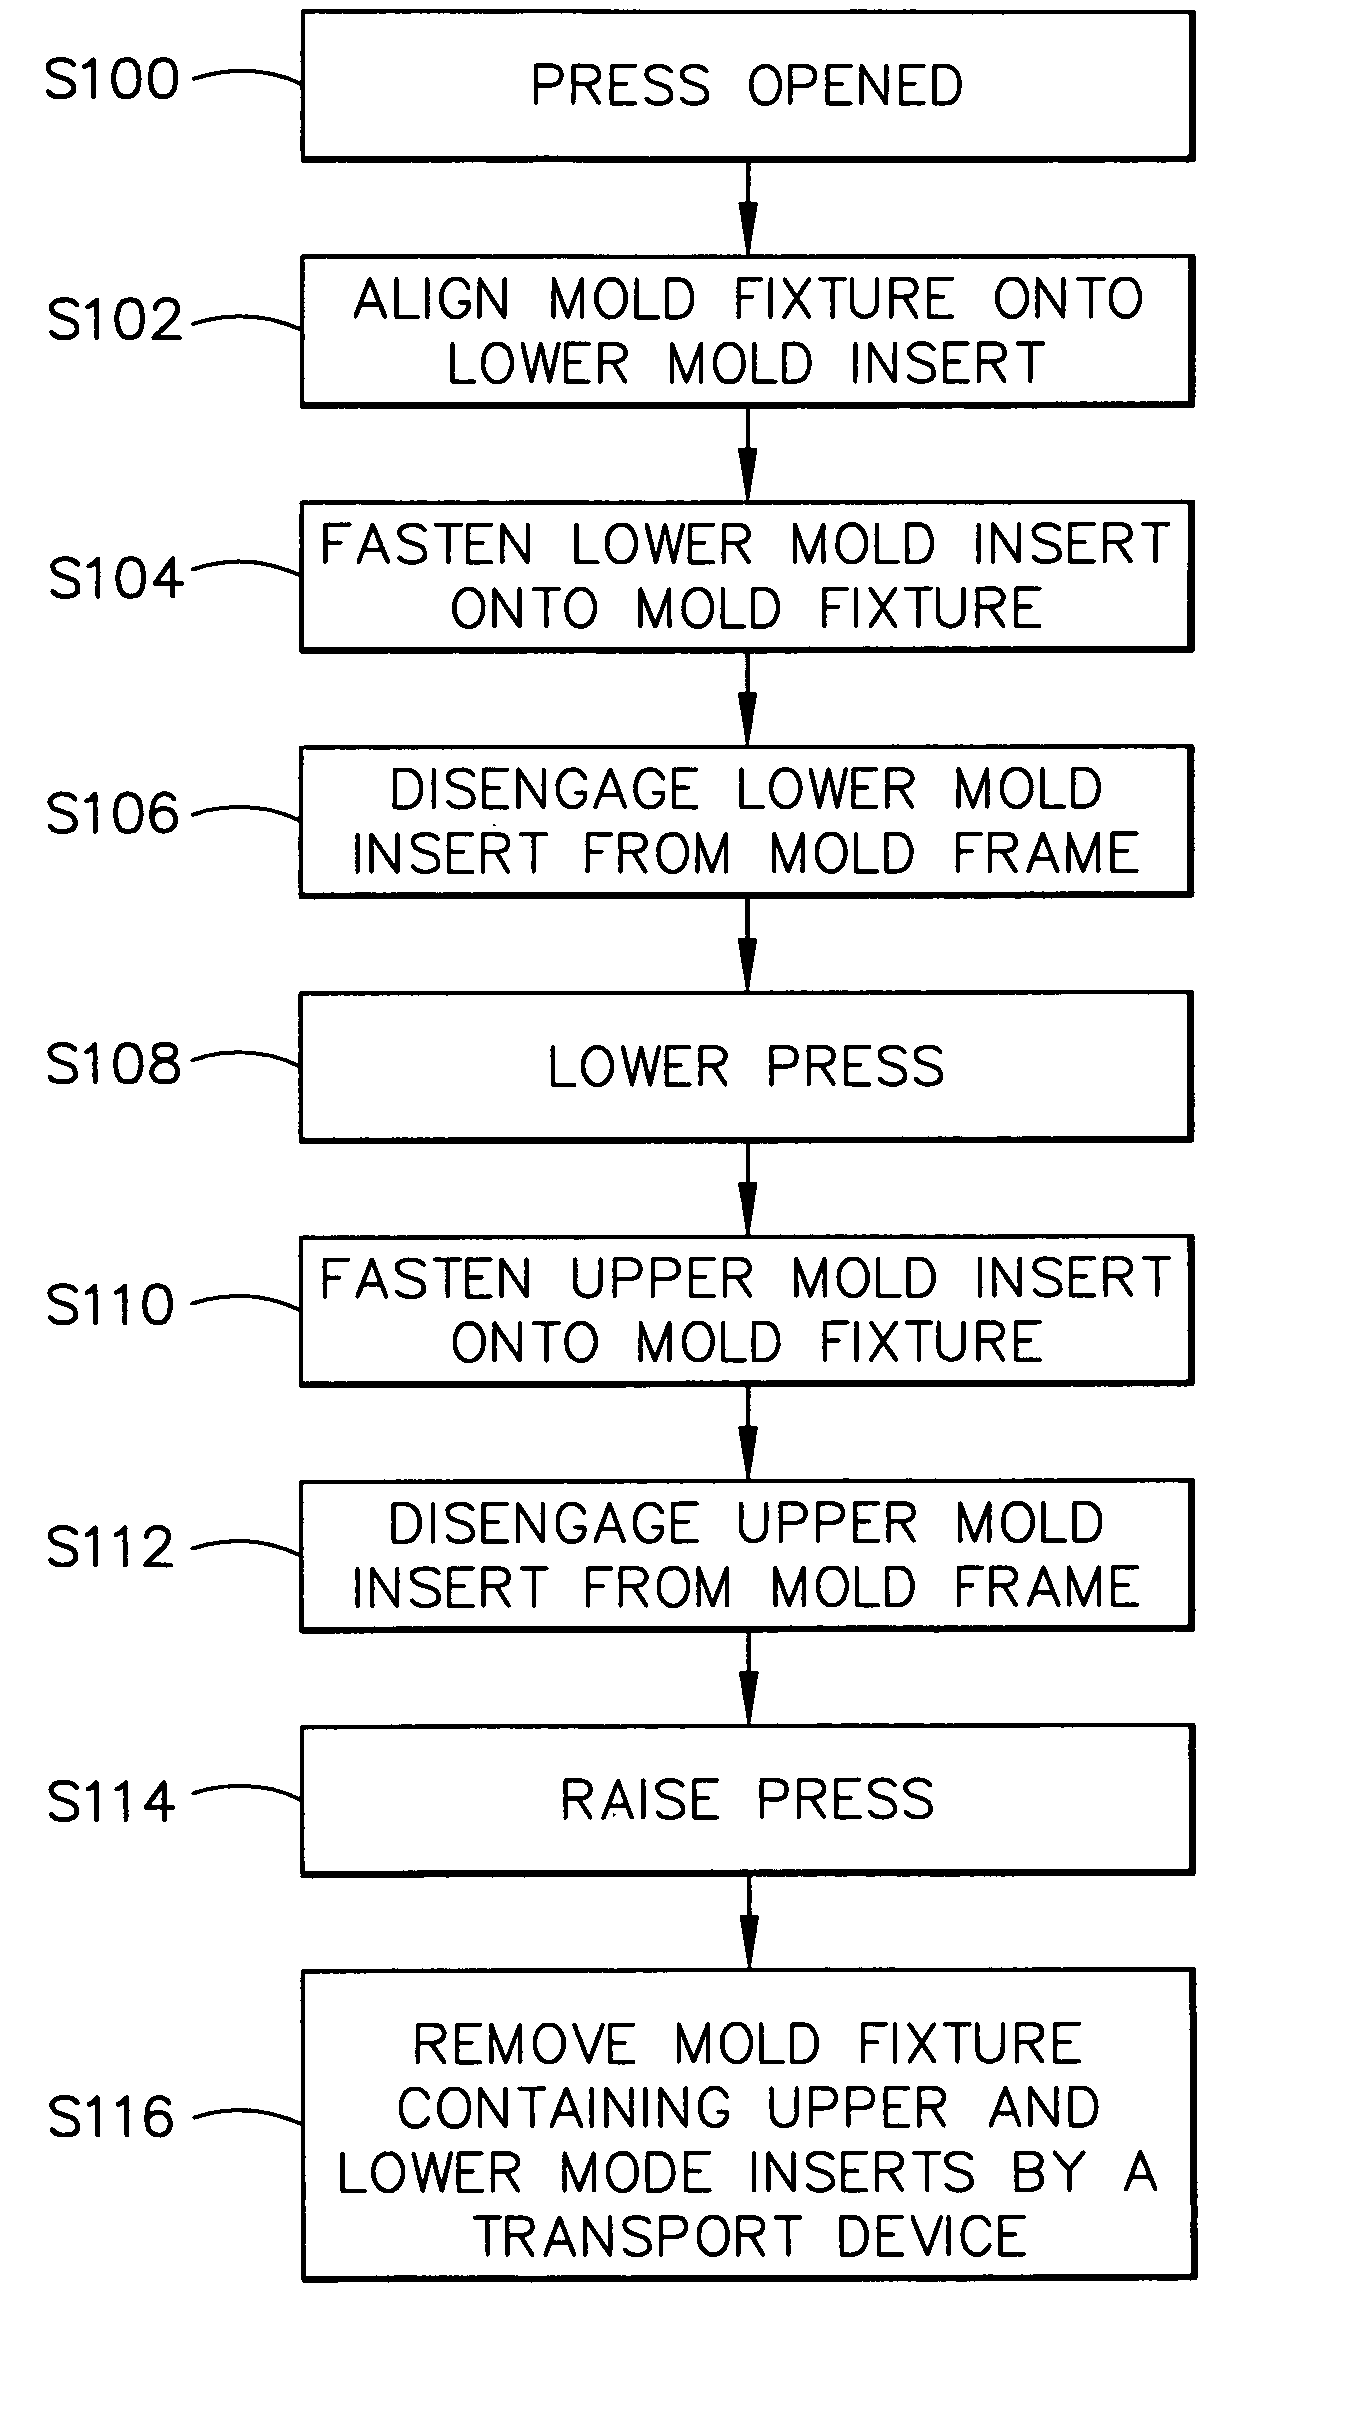 Method of extracting and inserting upper and lower molds